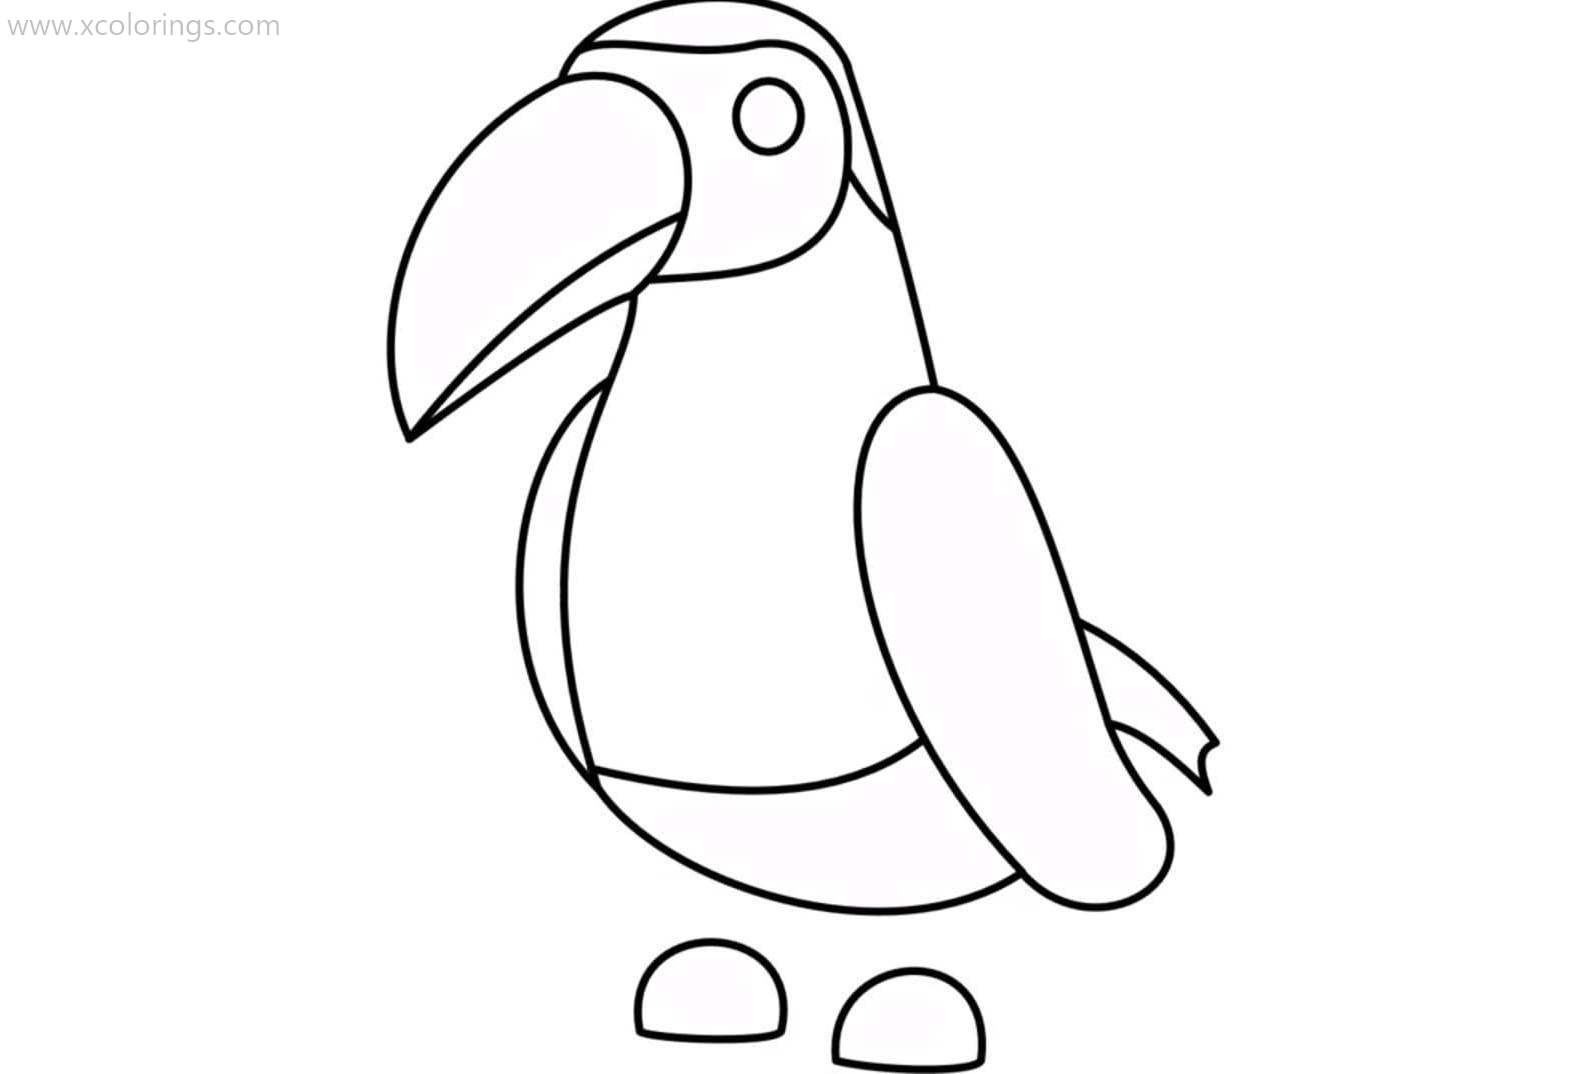 Free Roblox Adopt Me Coloring Pages Toucan printable